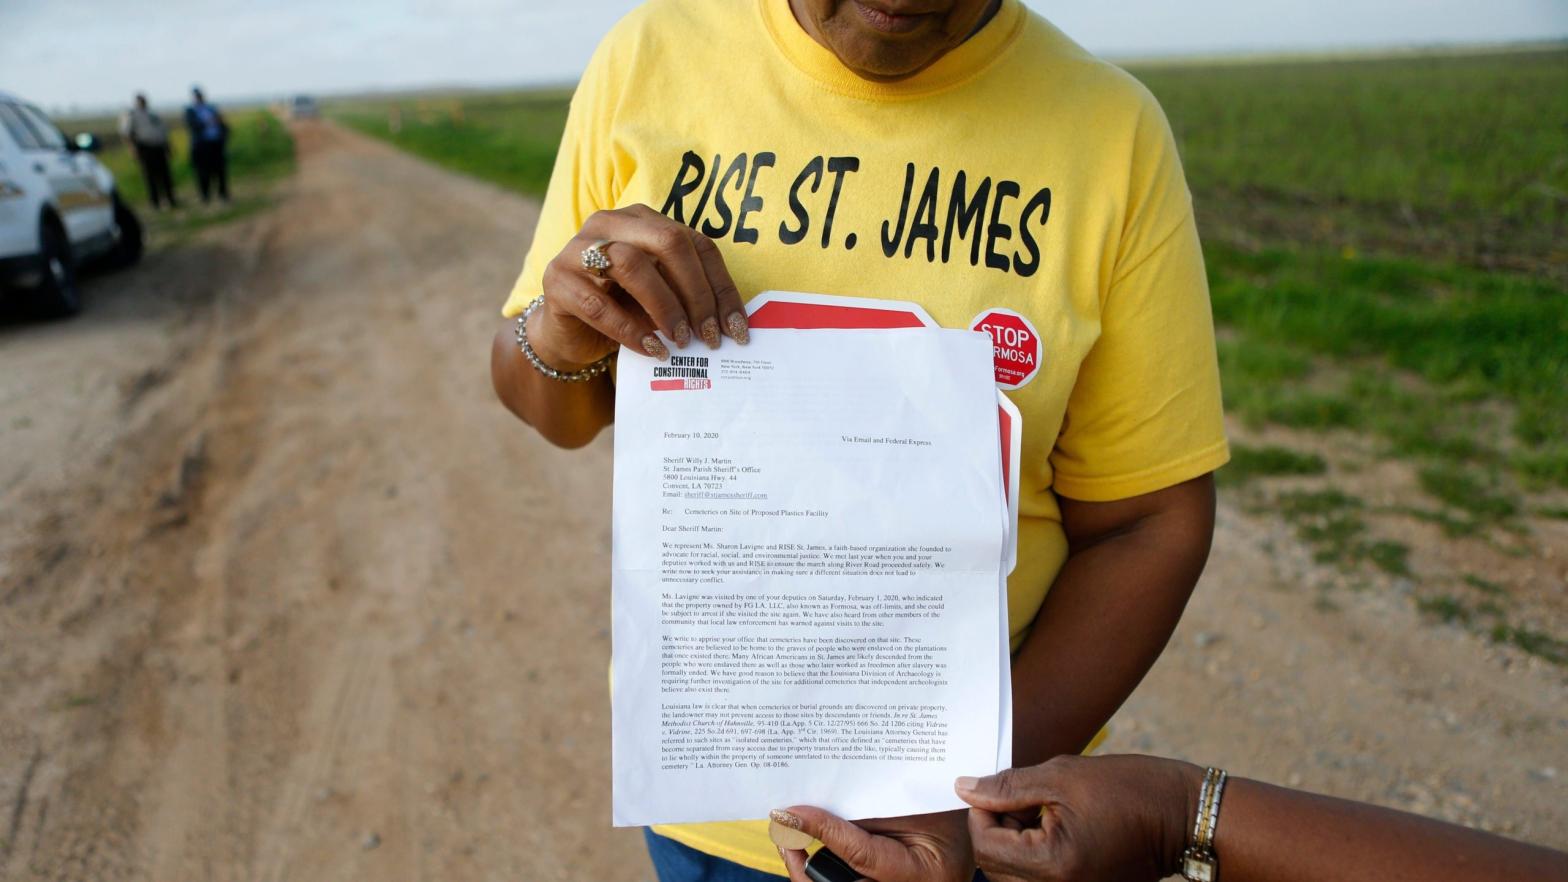 Sharon Lavigne, a member of RISE St. James, holds a letter addressed to the St. James Parish Sheriff, explaining their legal right to access to a burial site on Formosa property. (Photo: Gerald Herbert, AP)